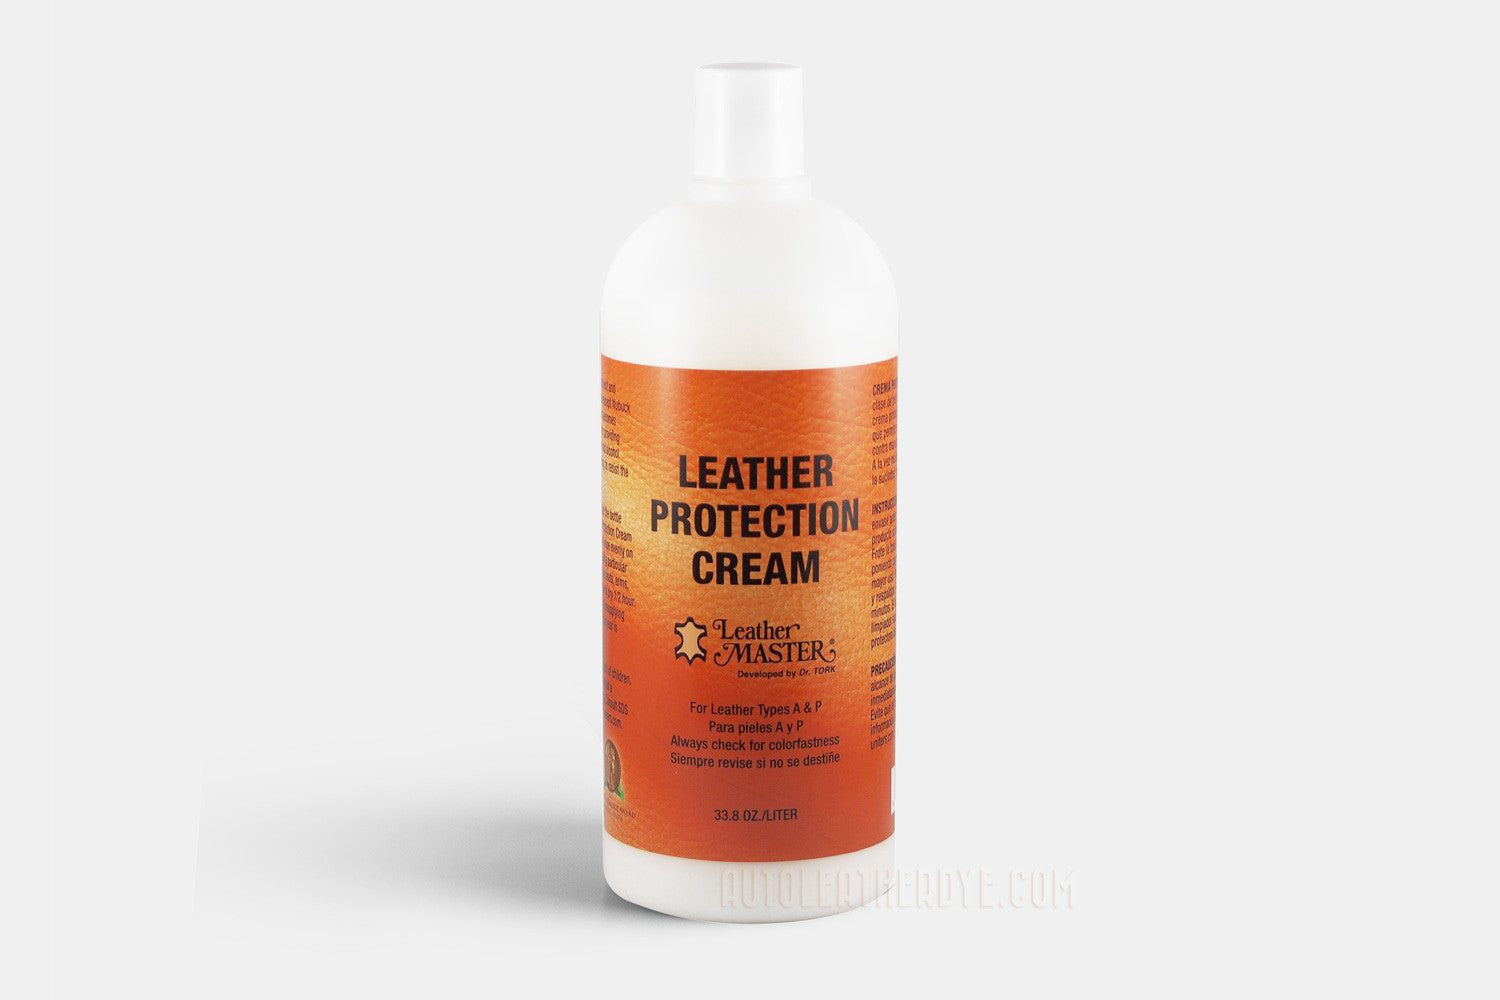 Leather Master Protection Cream 1 Liter